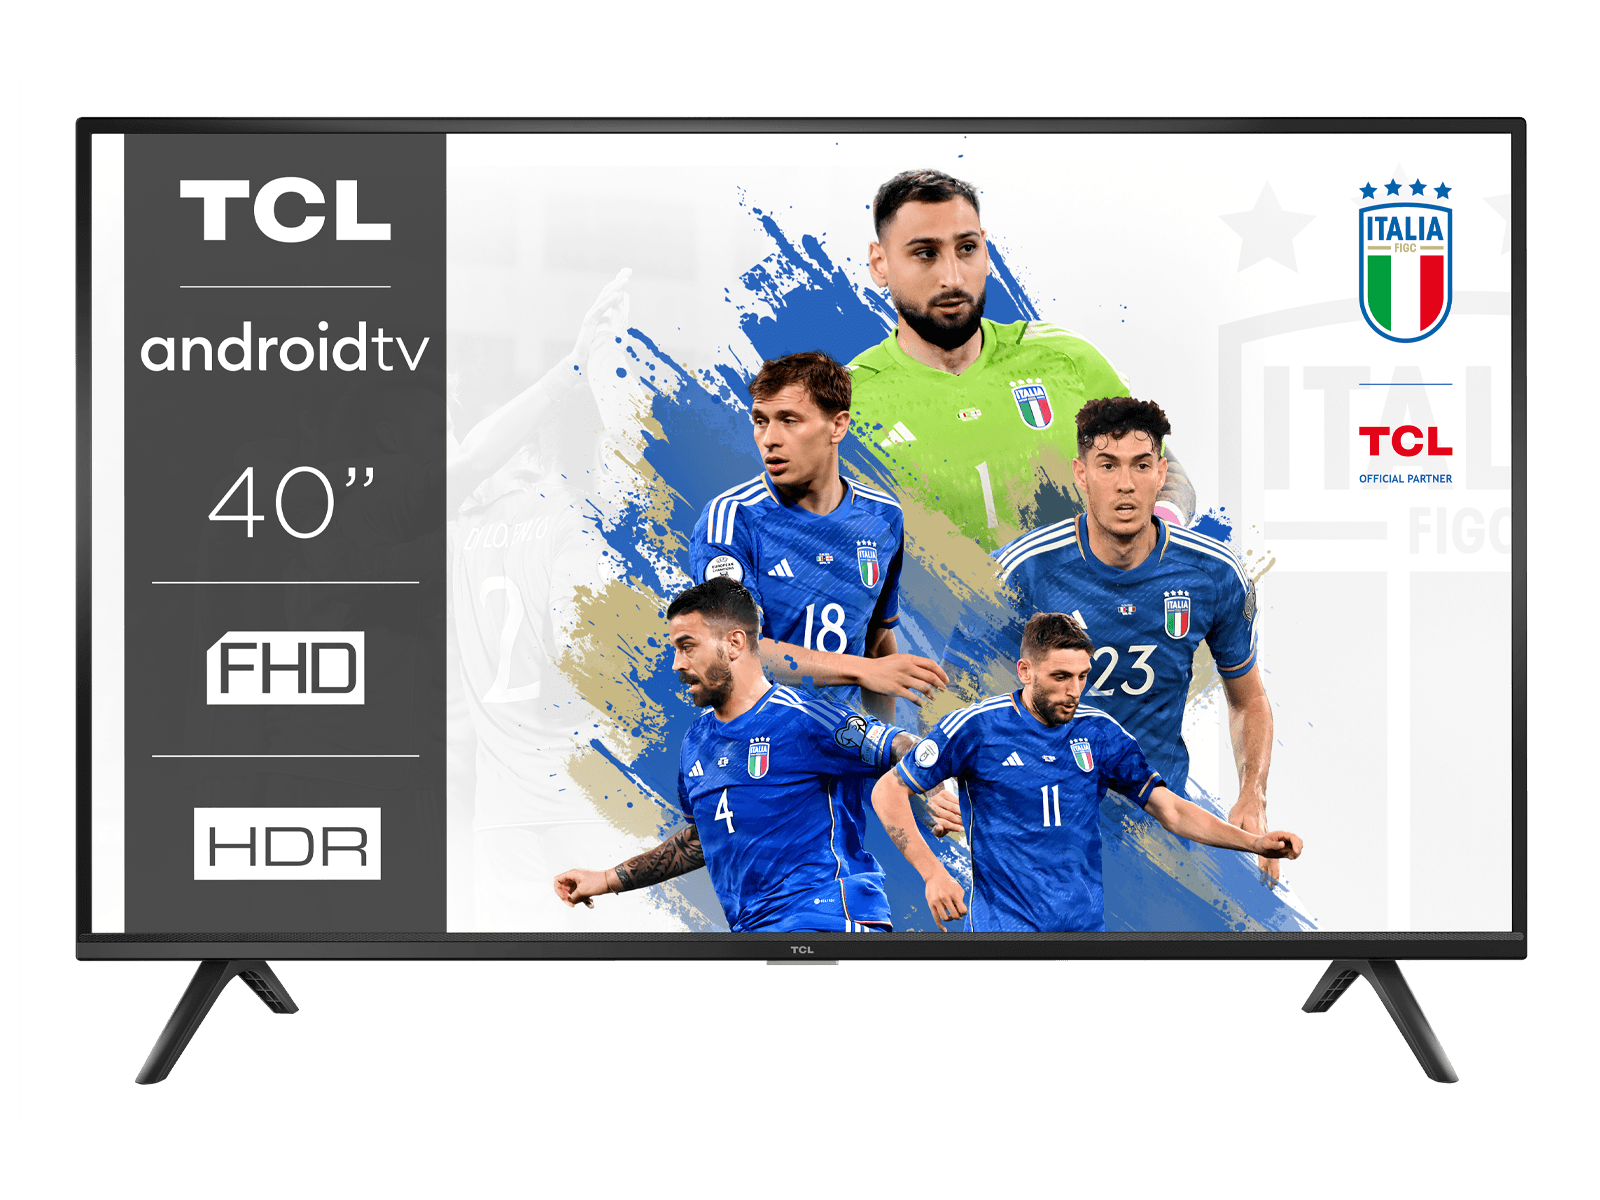 TCL Serie S52 40 - TV FHD - Dolby Audio - Android TV - TCL Italy